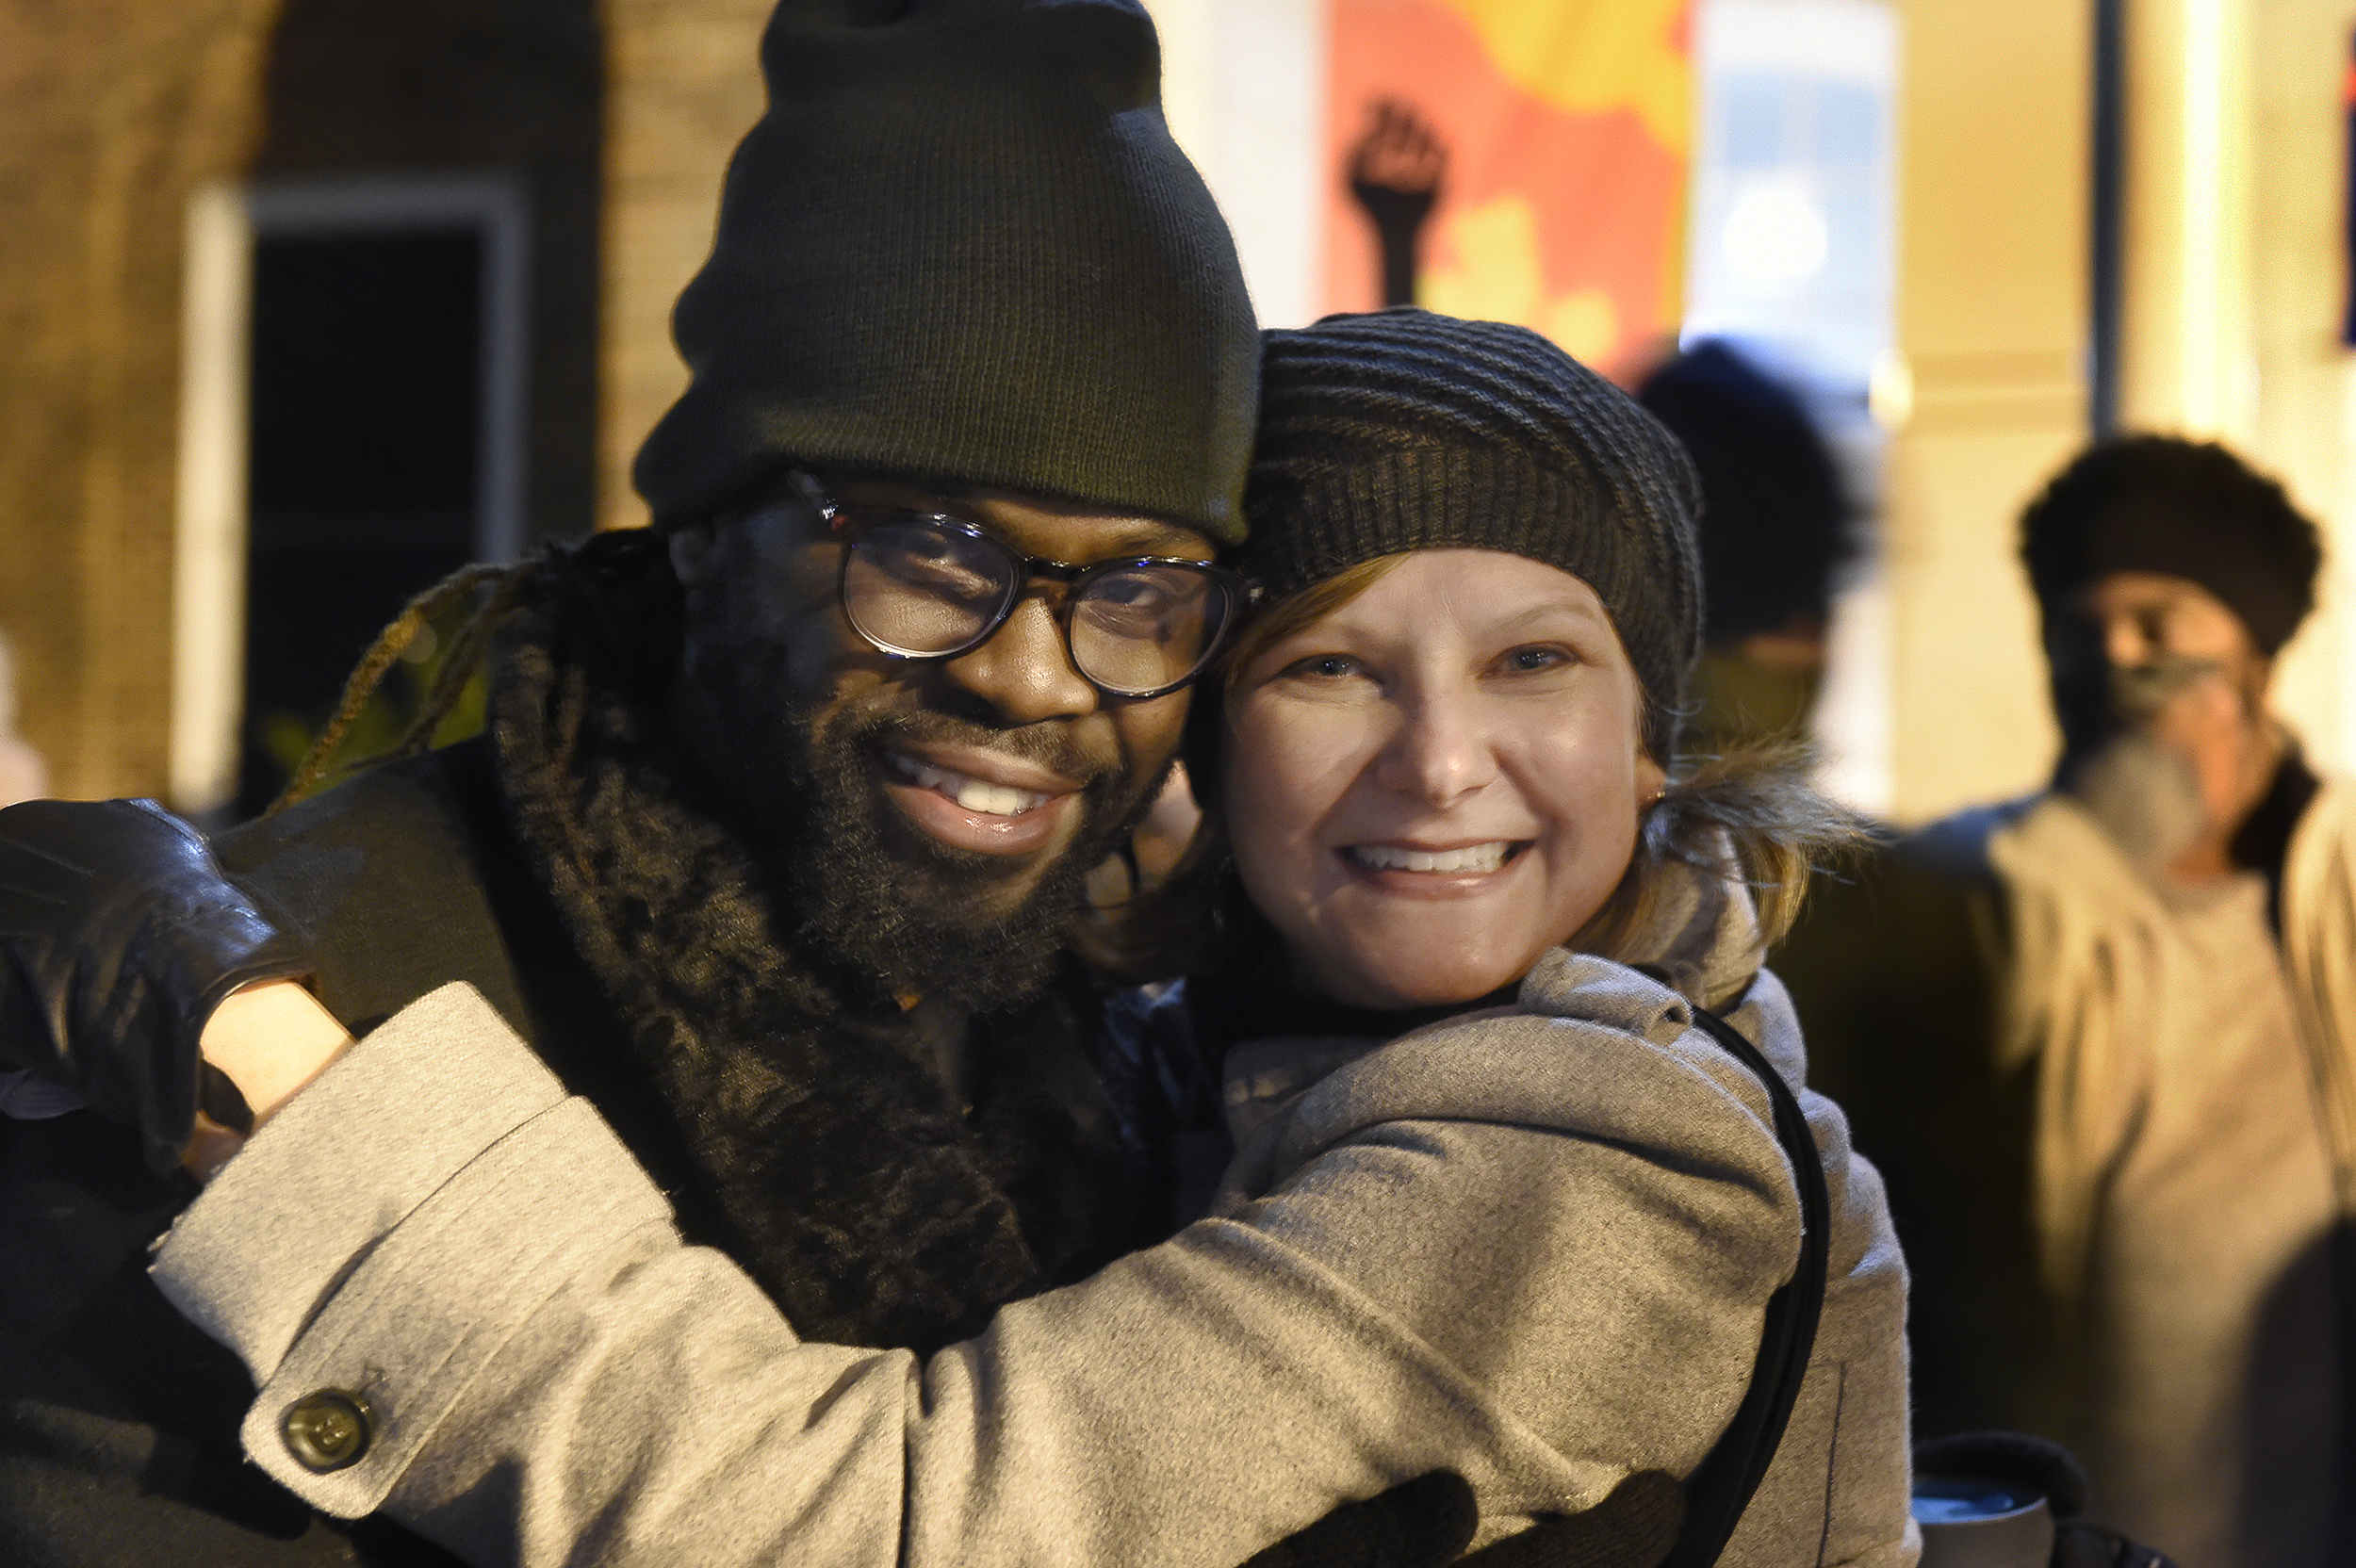 C.J. Suitt and Heather Tatreau share a hug and smiles at the Peace and Justice Plaza.